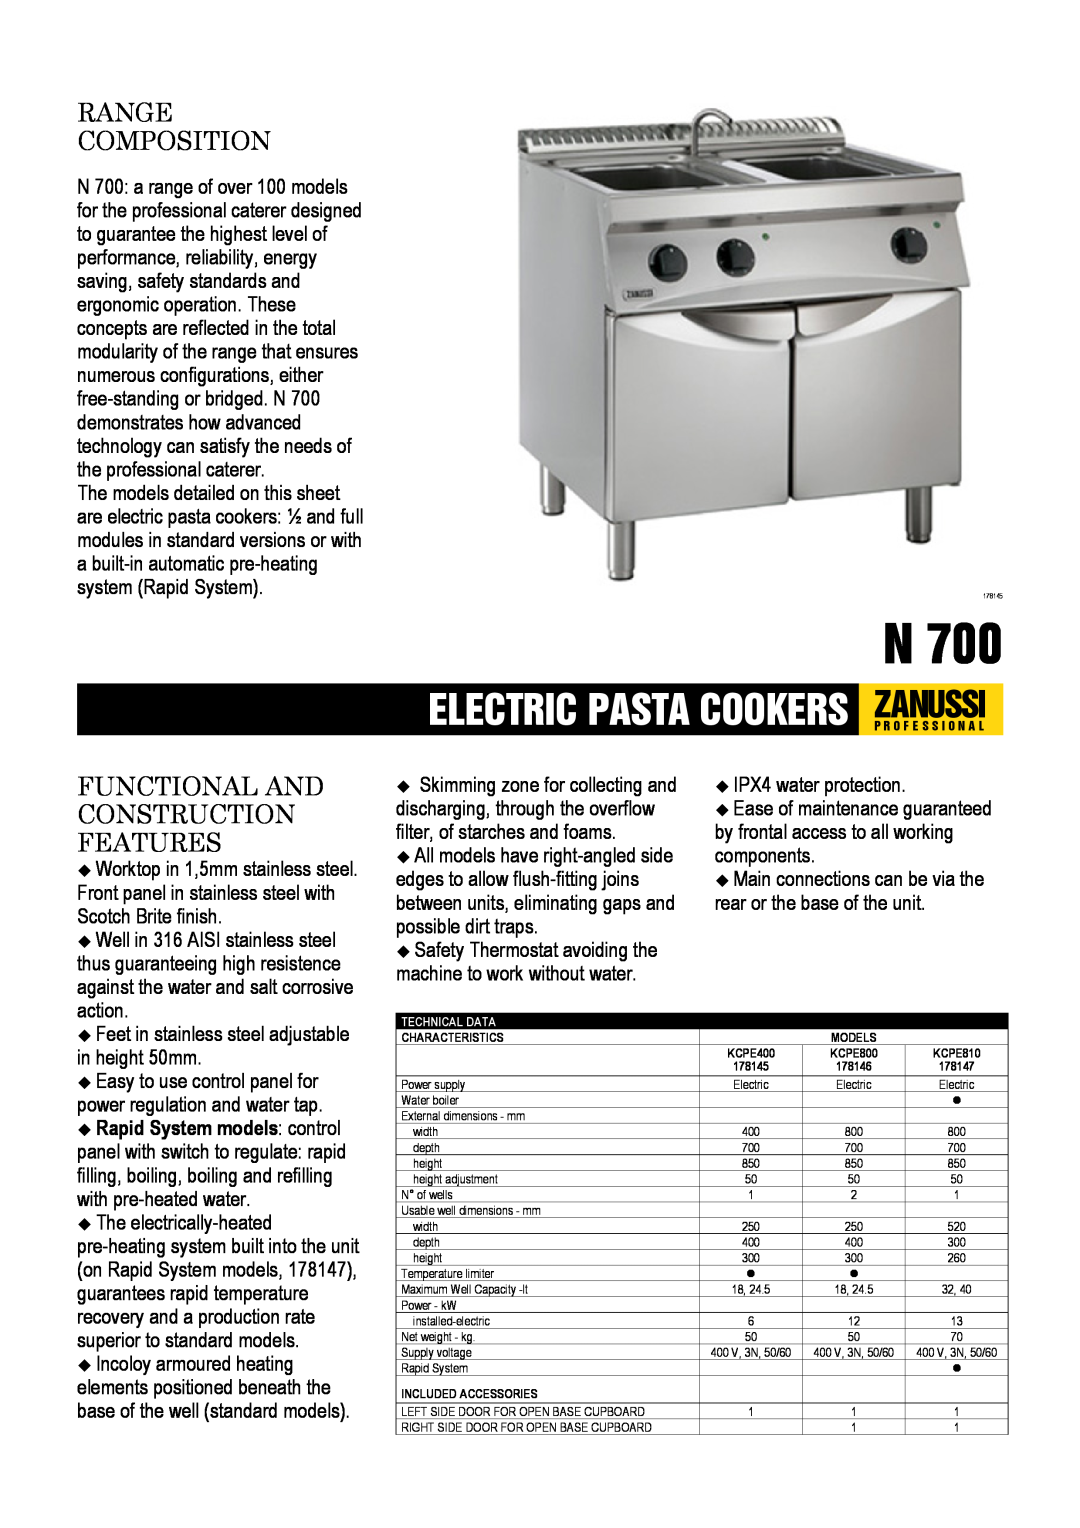 Zanussi KCPE810, 178146 dimensions Range Composition, Functional And Construction Features, Scotch Brite finish, action 